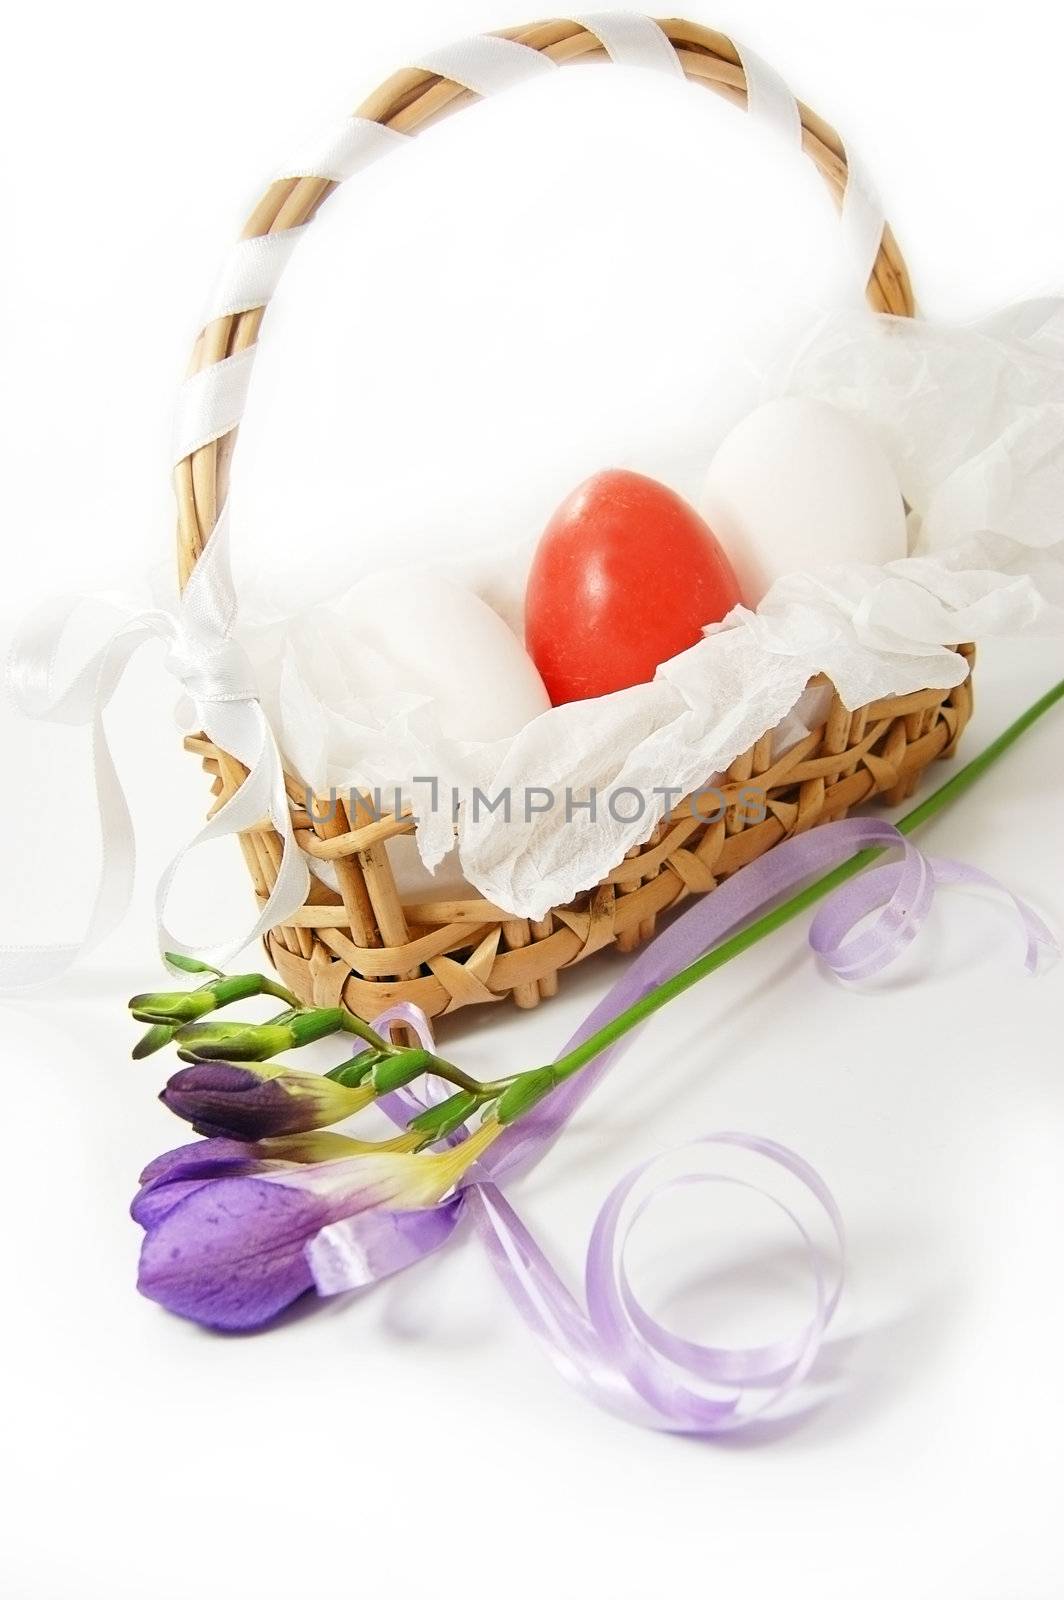 Basket with white and red eggs isolated on white